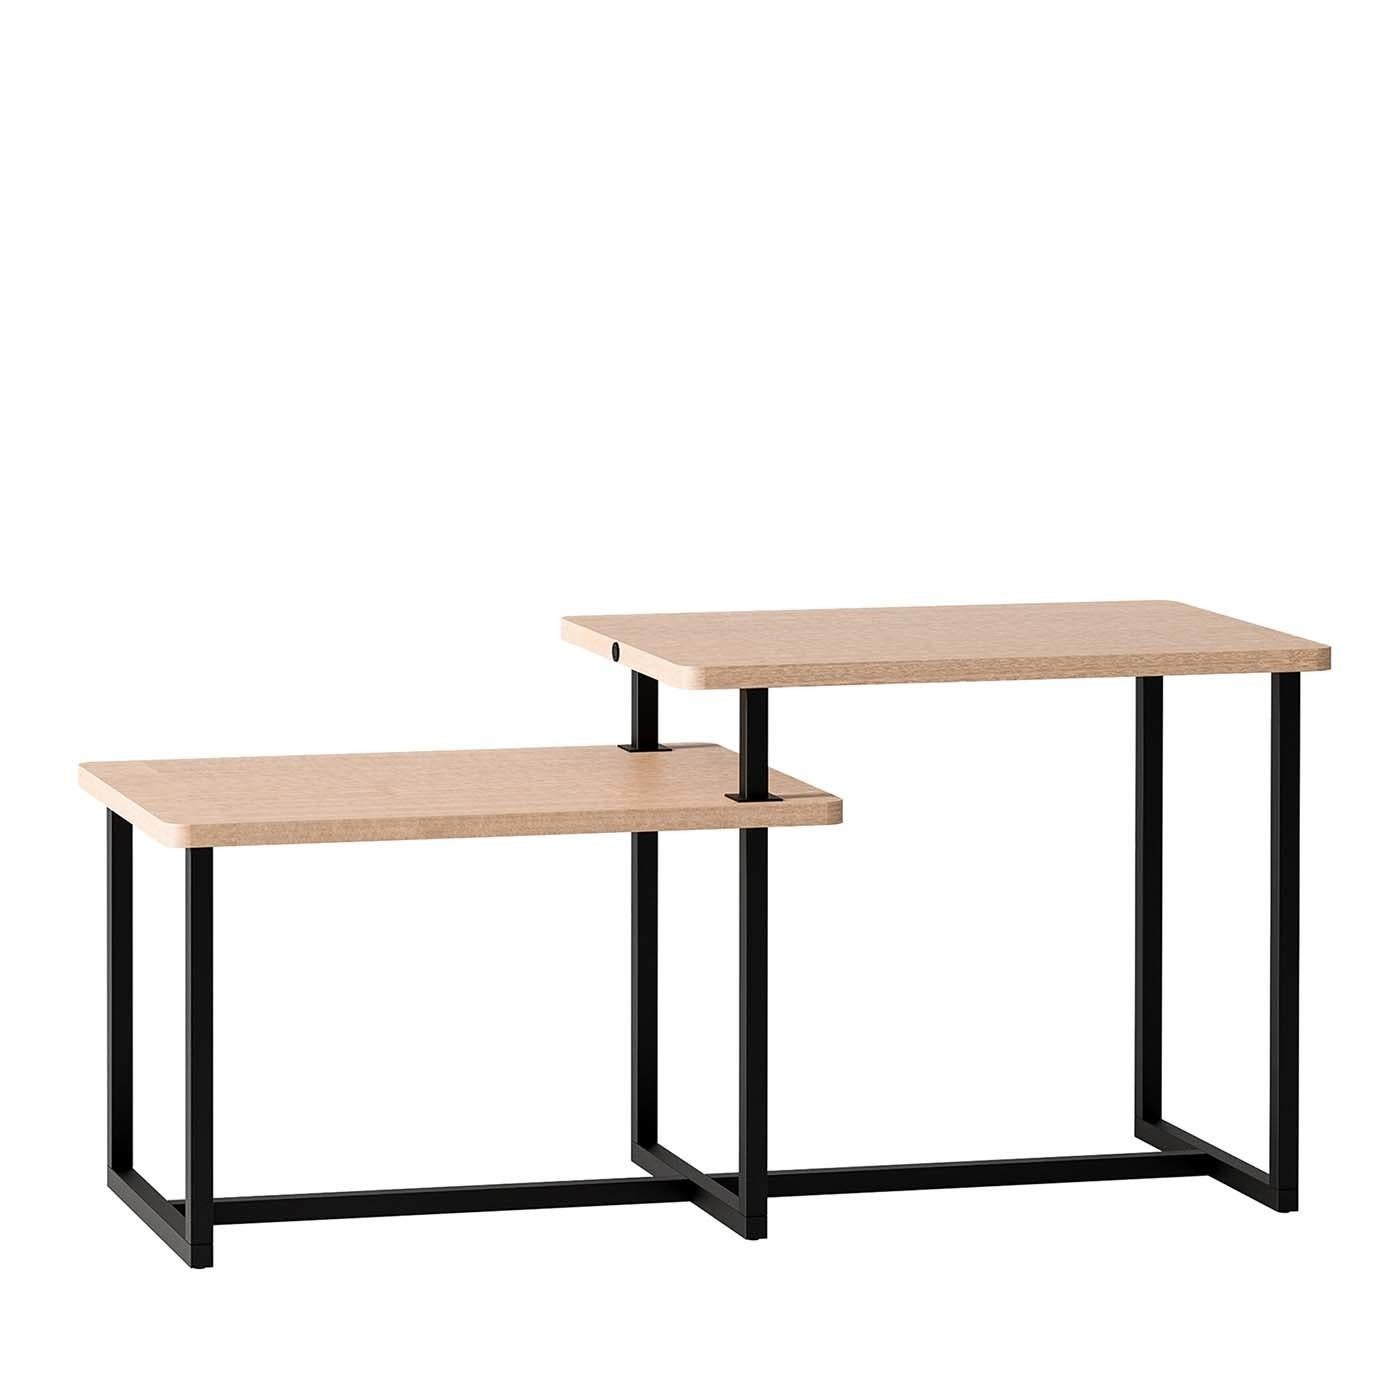 A captivating combination of geometric lines, this table redefines the space to add a sleek focal point to a Minimalist and Industrial-inspired living room or office. Designed to be placed next to a sofa, the rectangular wooden tops with beige